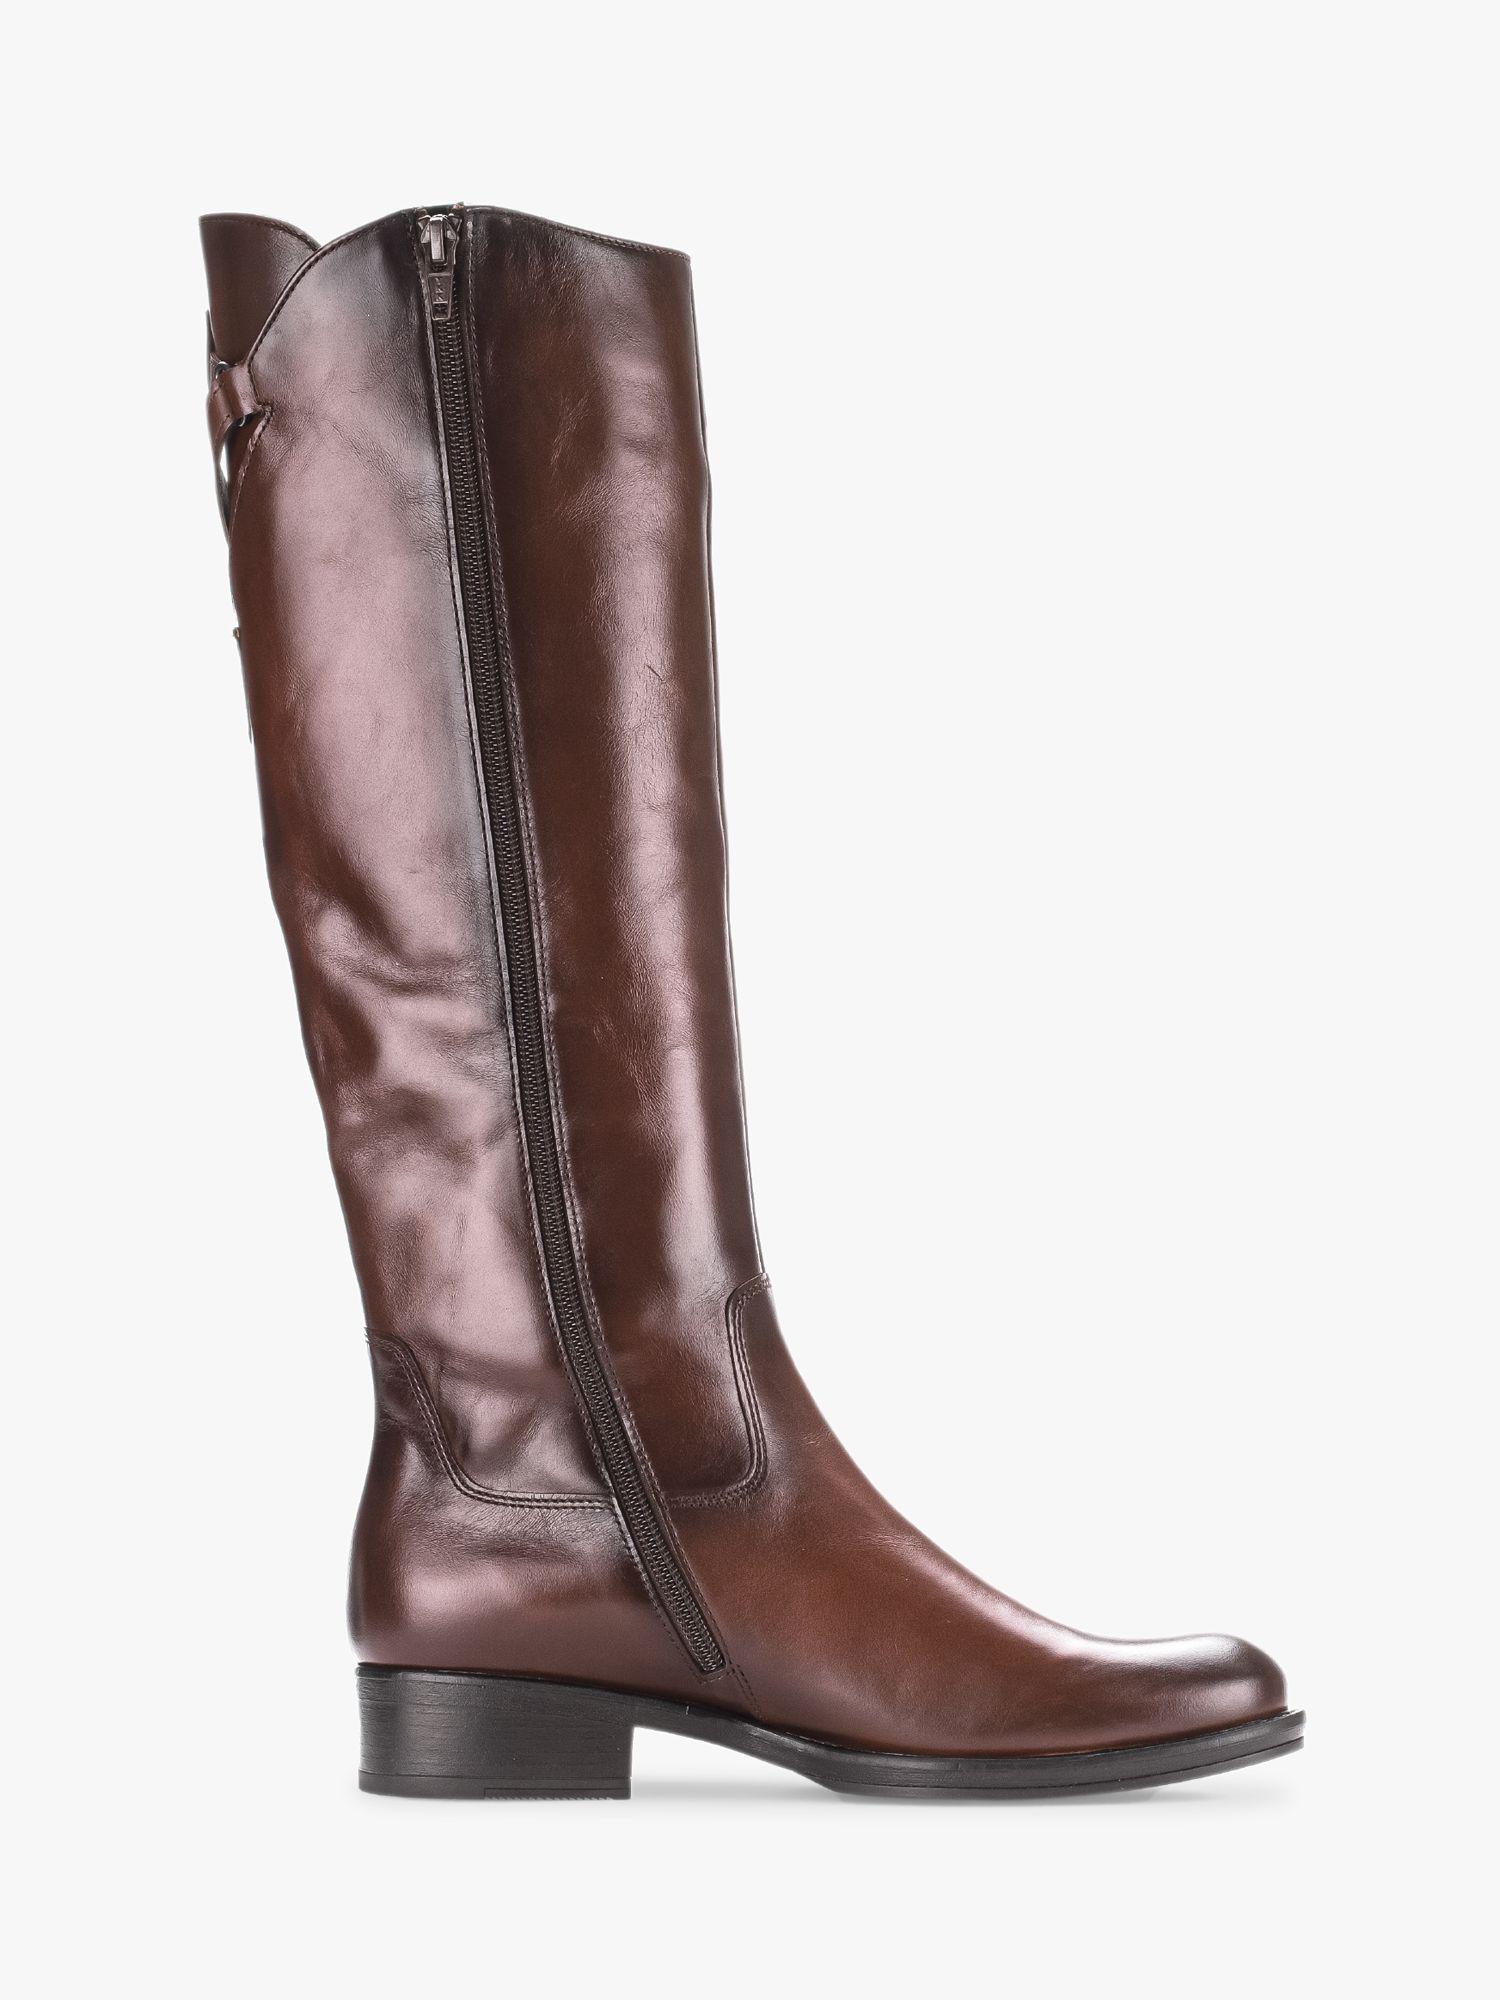 Gabor Animate Leather Knee High Boots in Brown | Lyst UK